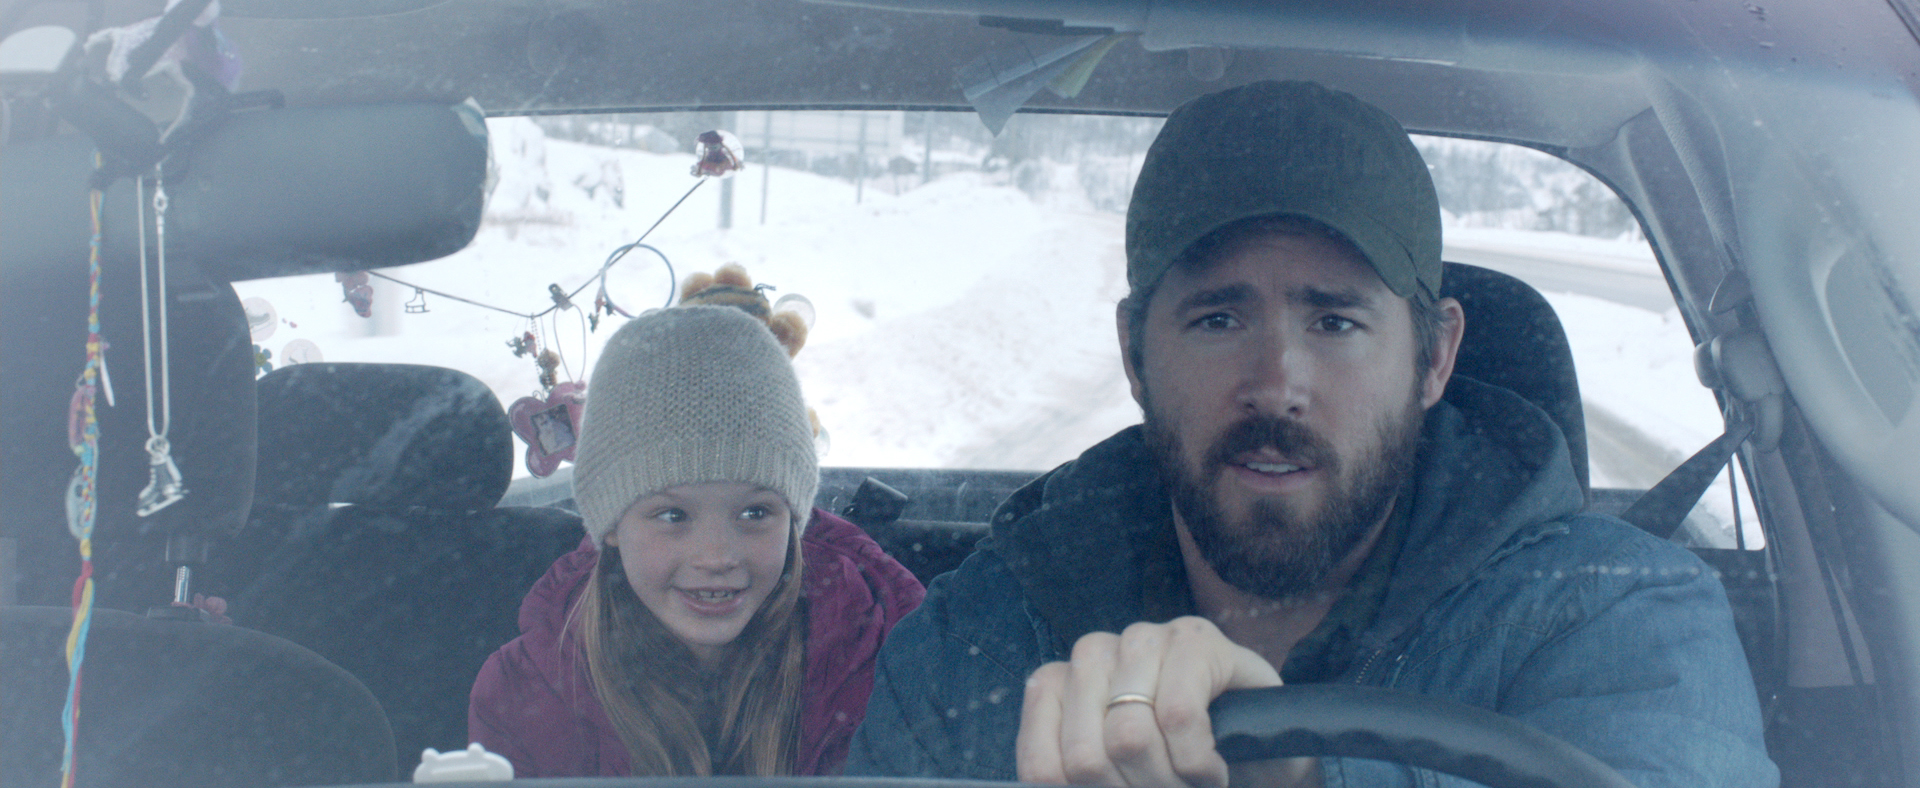 Atom Egoyan brings the oppression of winter into 'The Captive